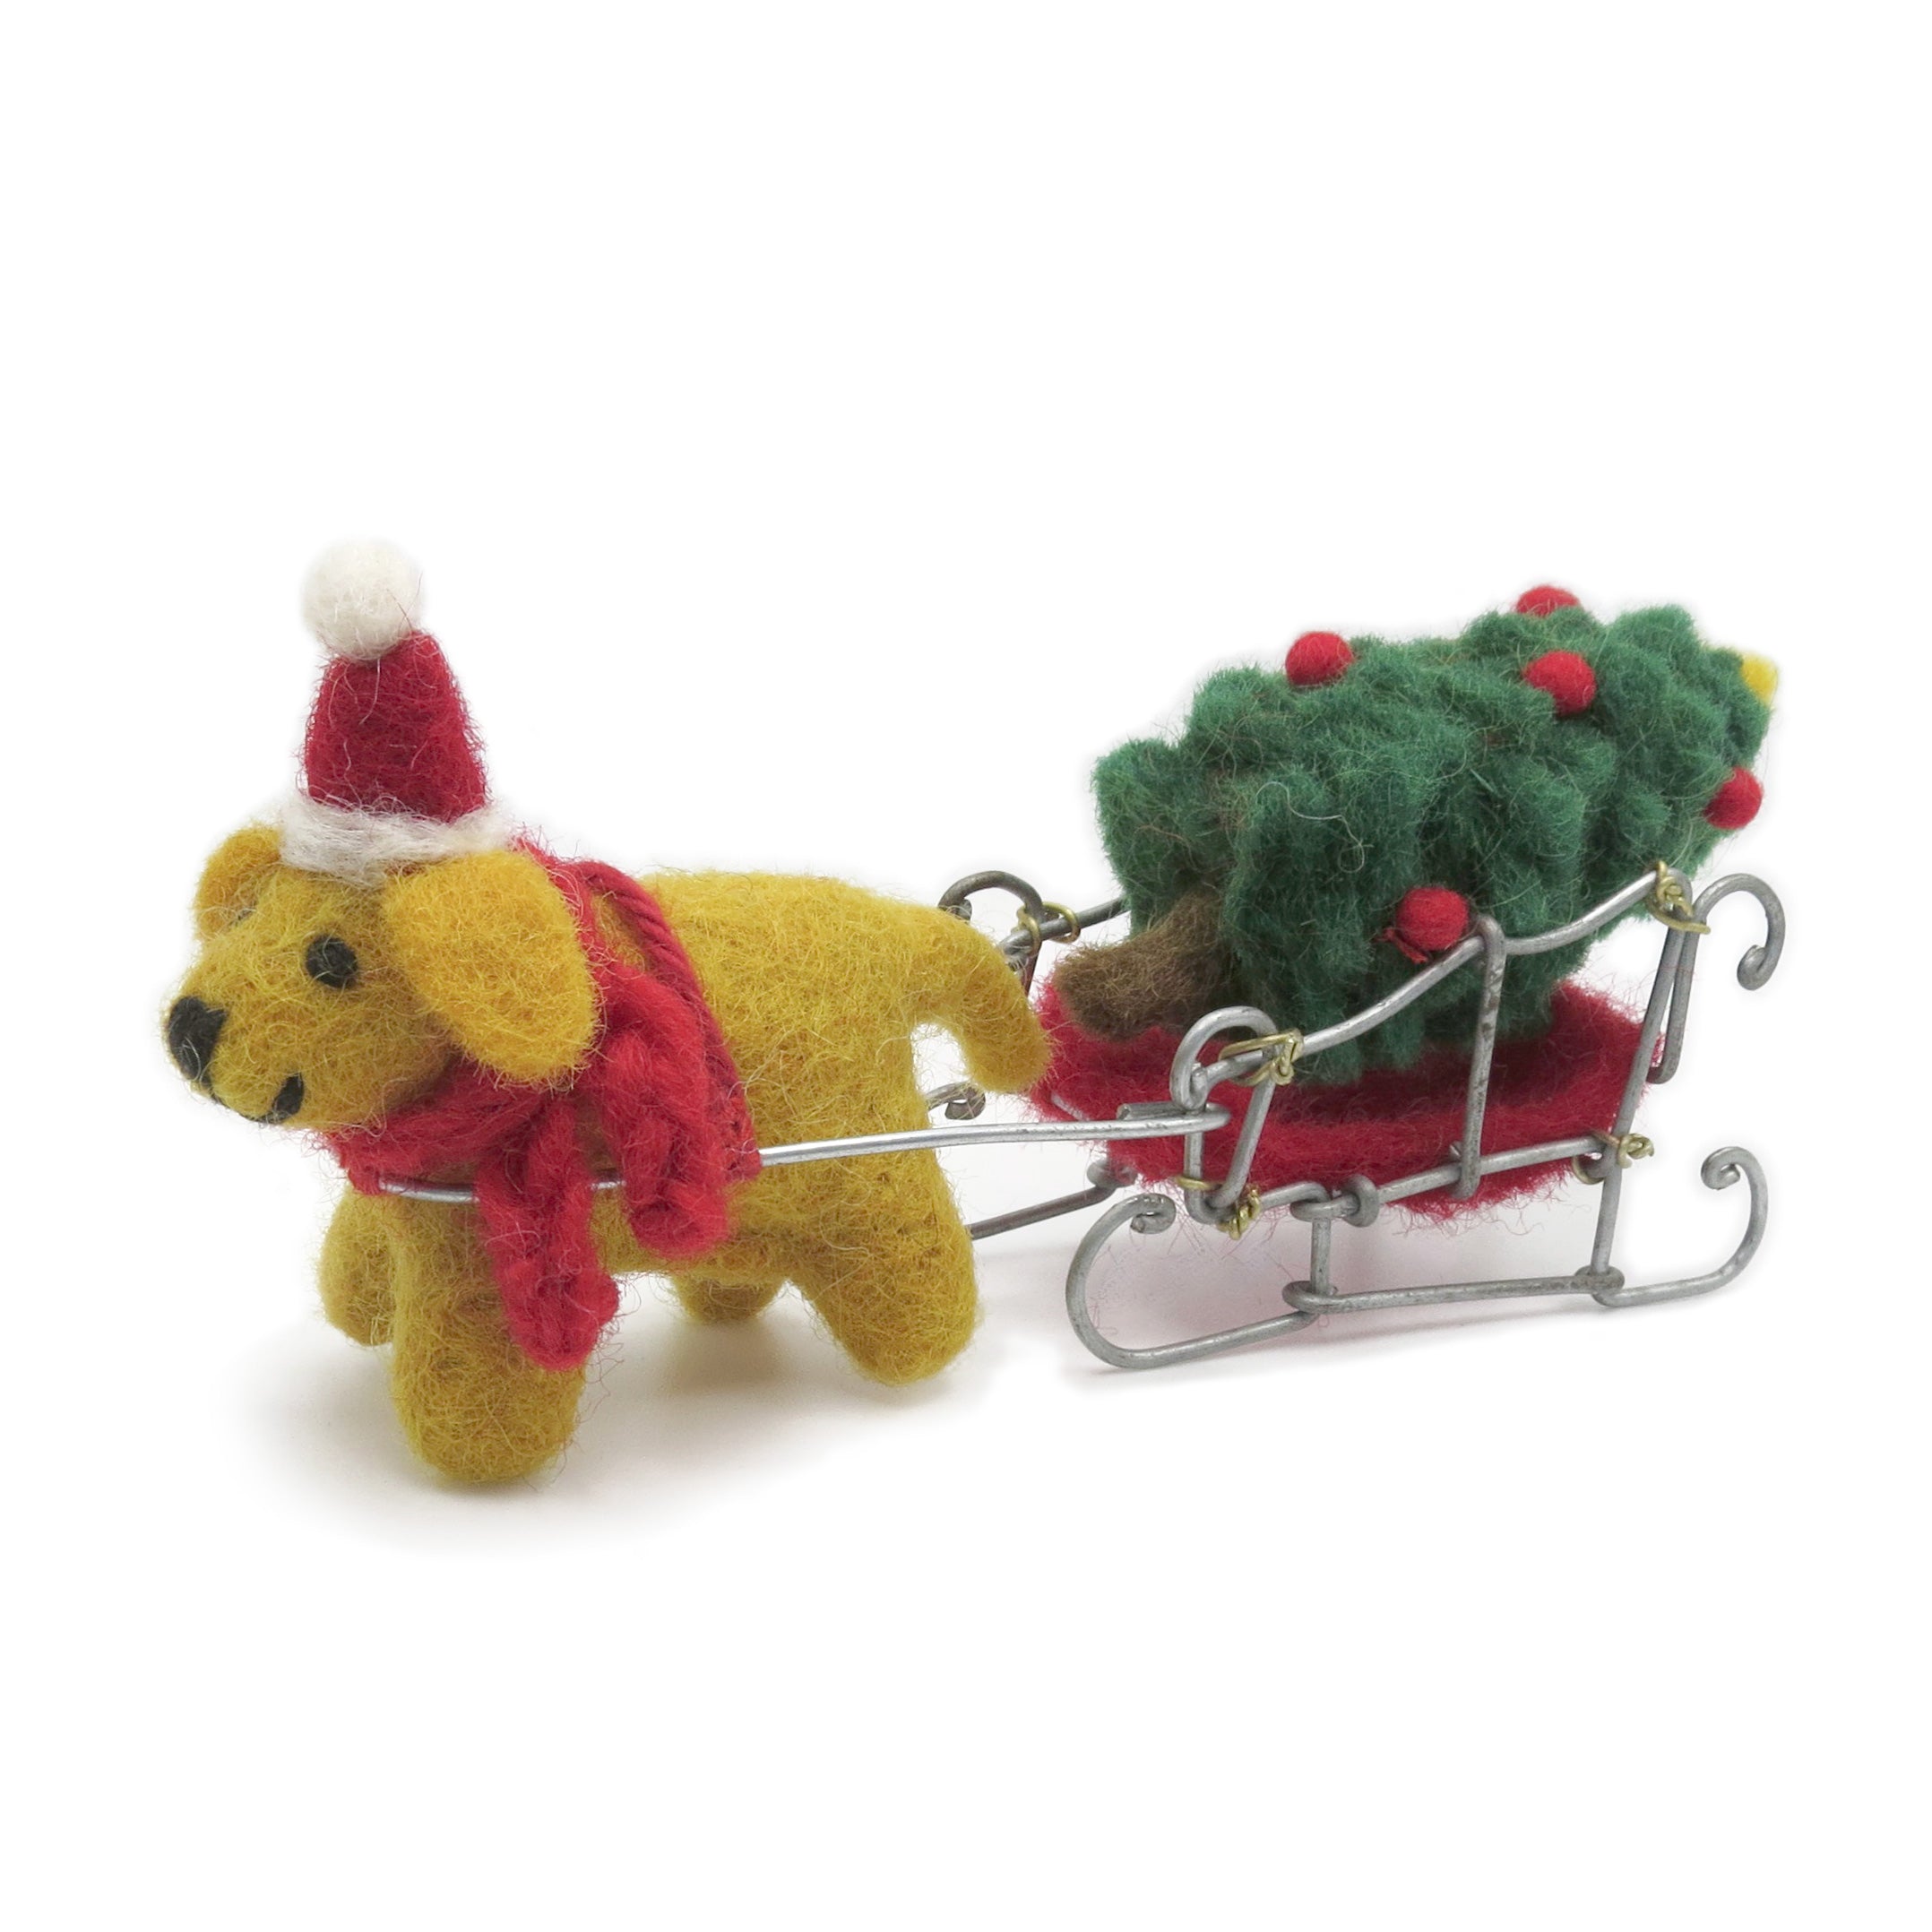 A felt golden Labrador wearing Christmas hat and scarf pulls a sleigh containing a Christmas tree